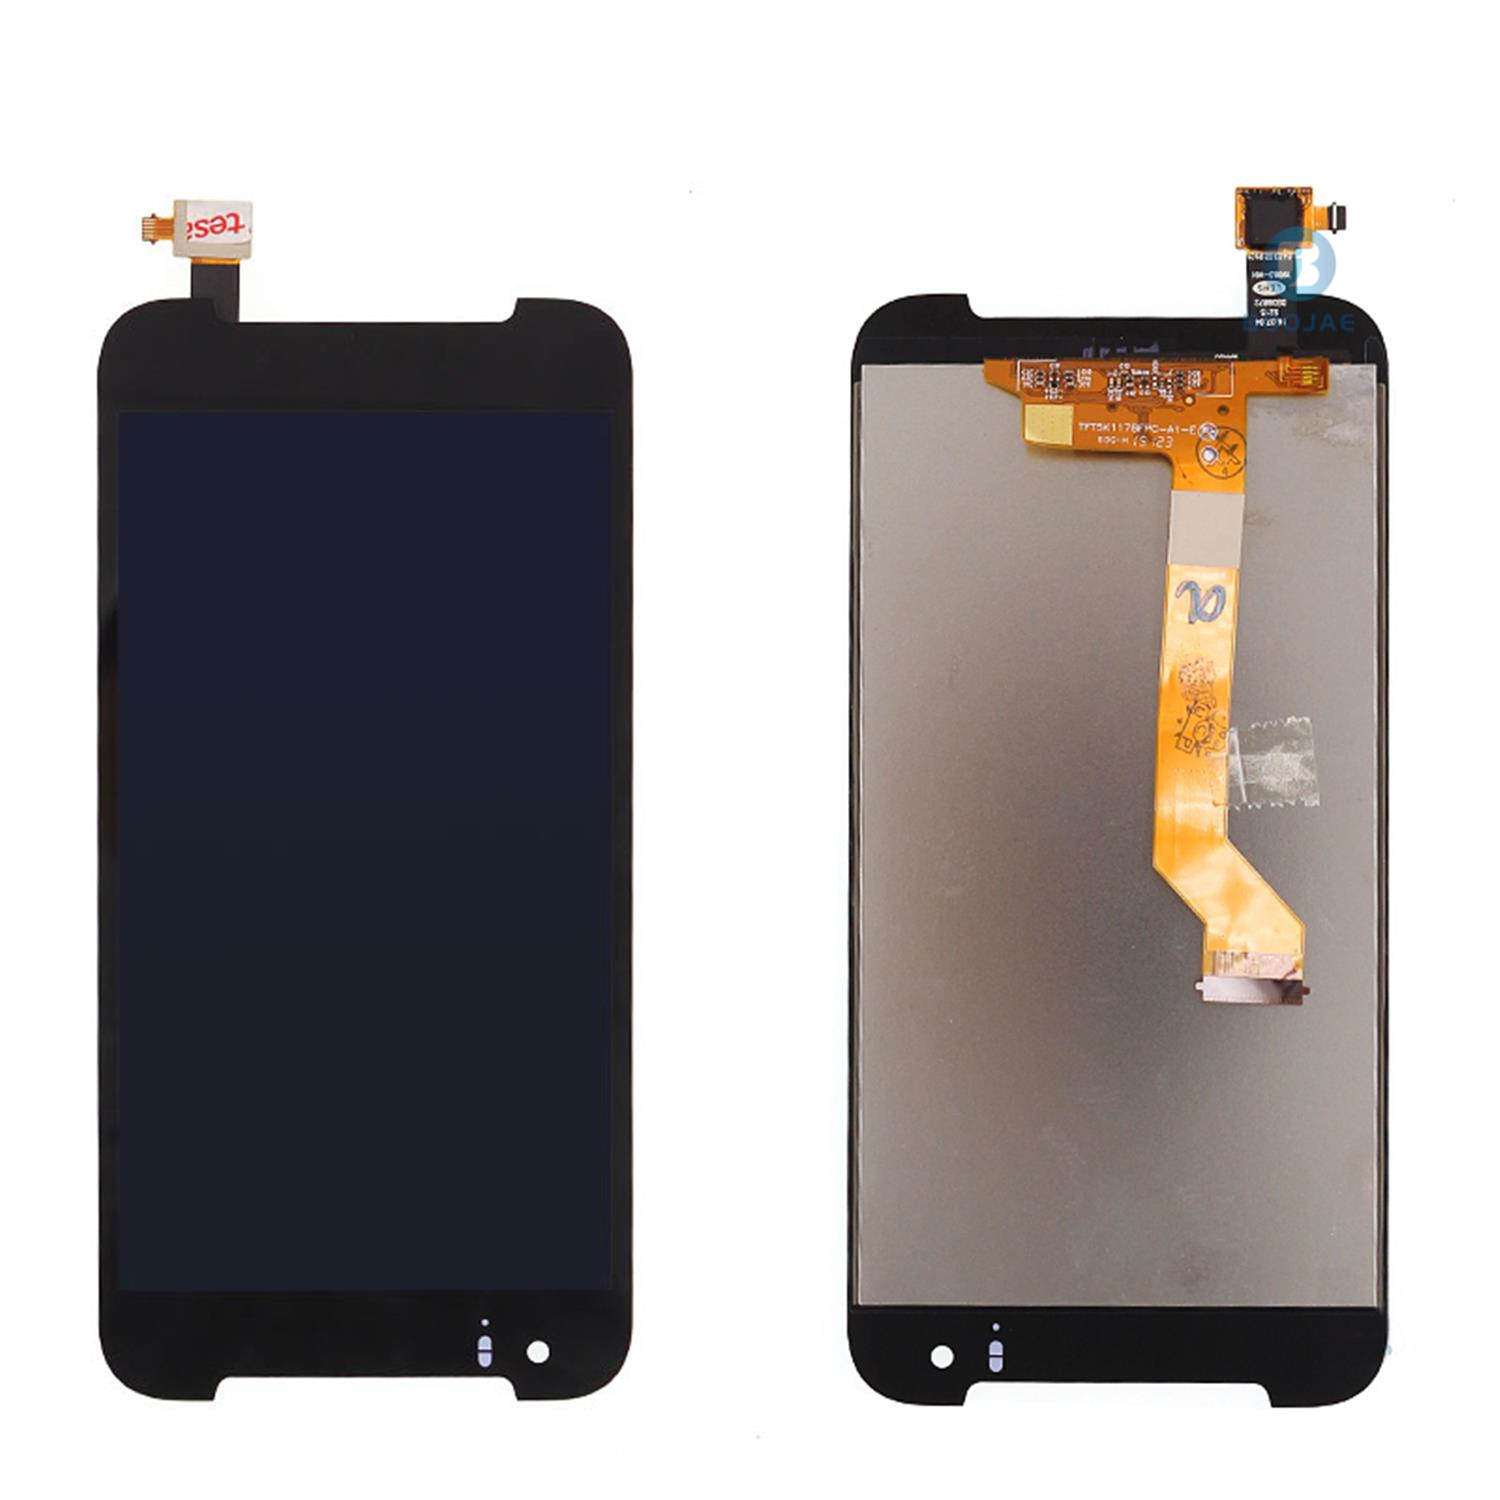 HTC Desire 830 LCD Screen Display , Lcd Assembly Replacement